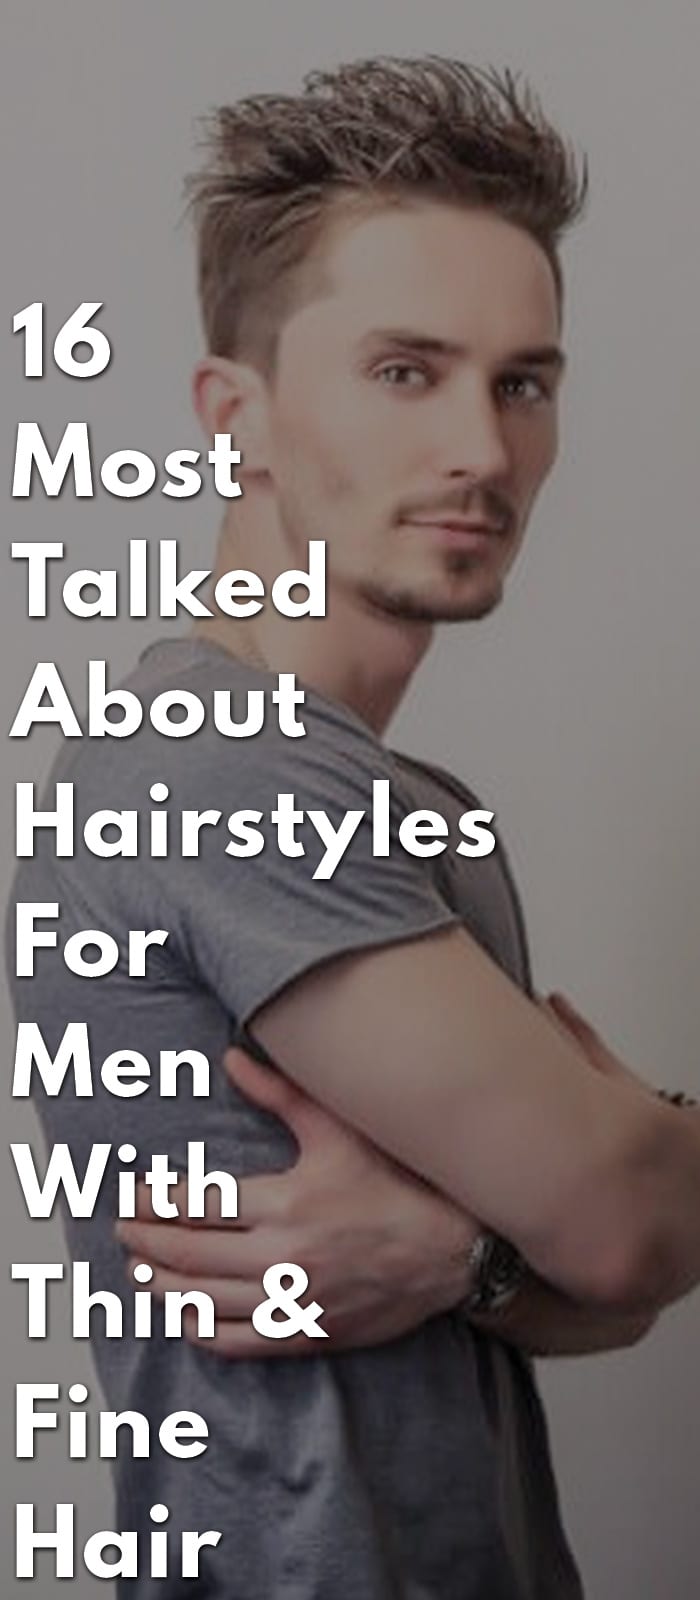 16-Most-Talked-About-Hairstyles-For-Men-With-Thin-&-Fine-Hair